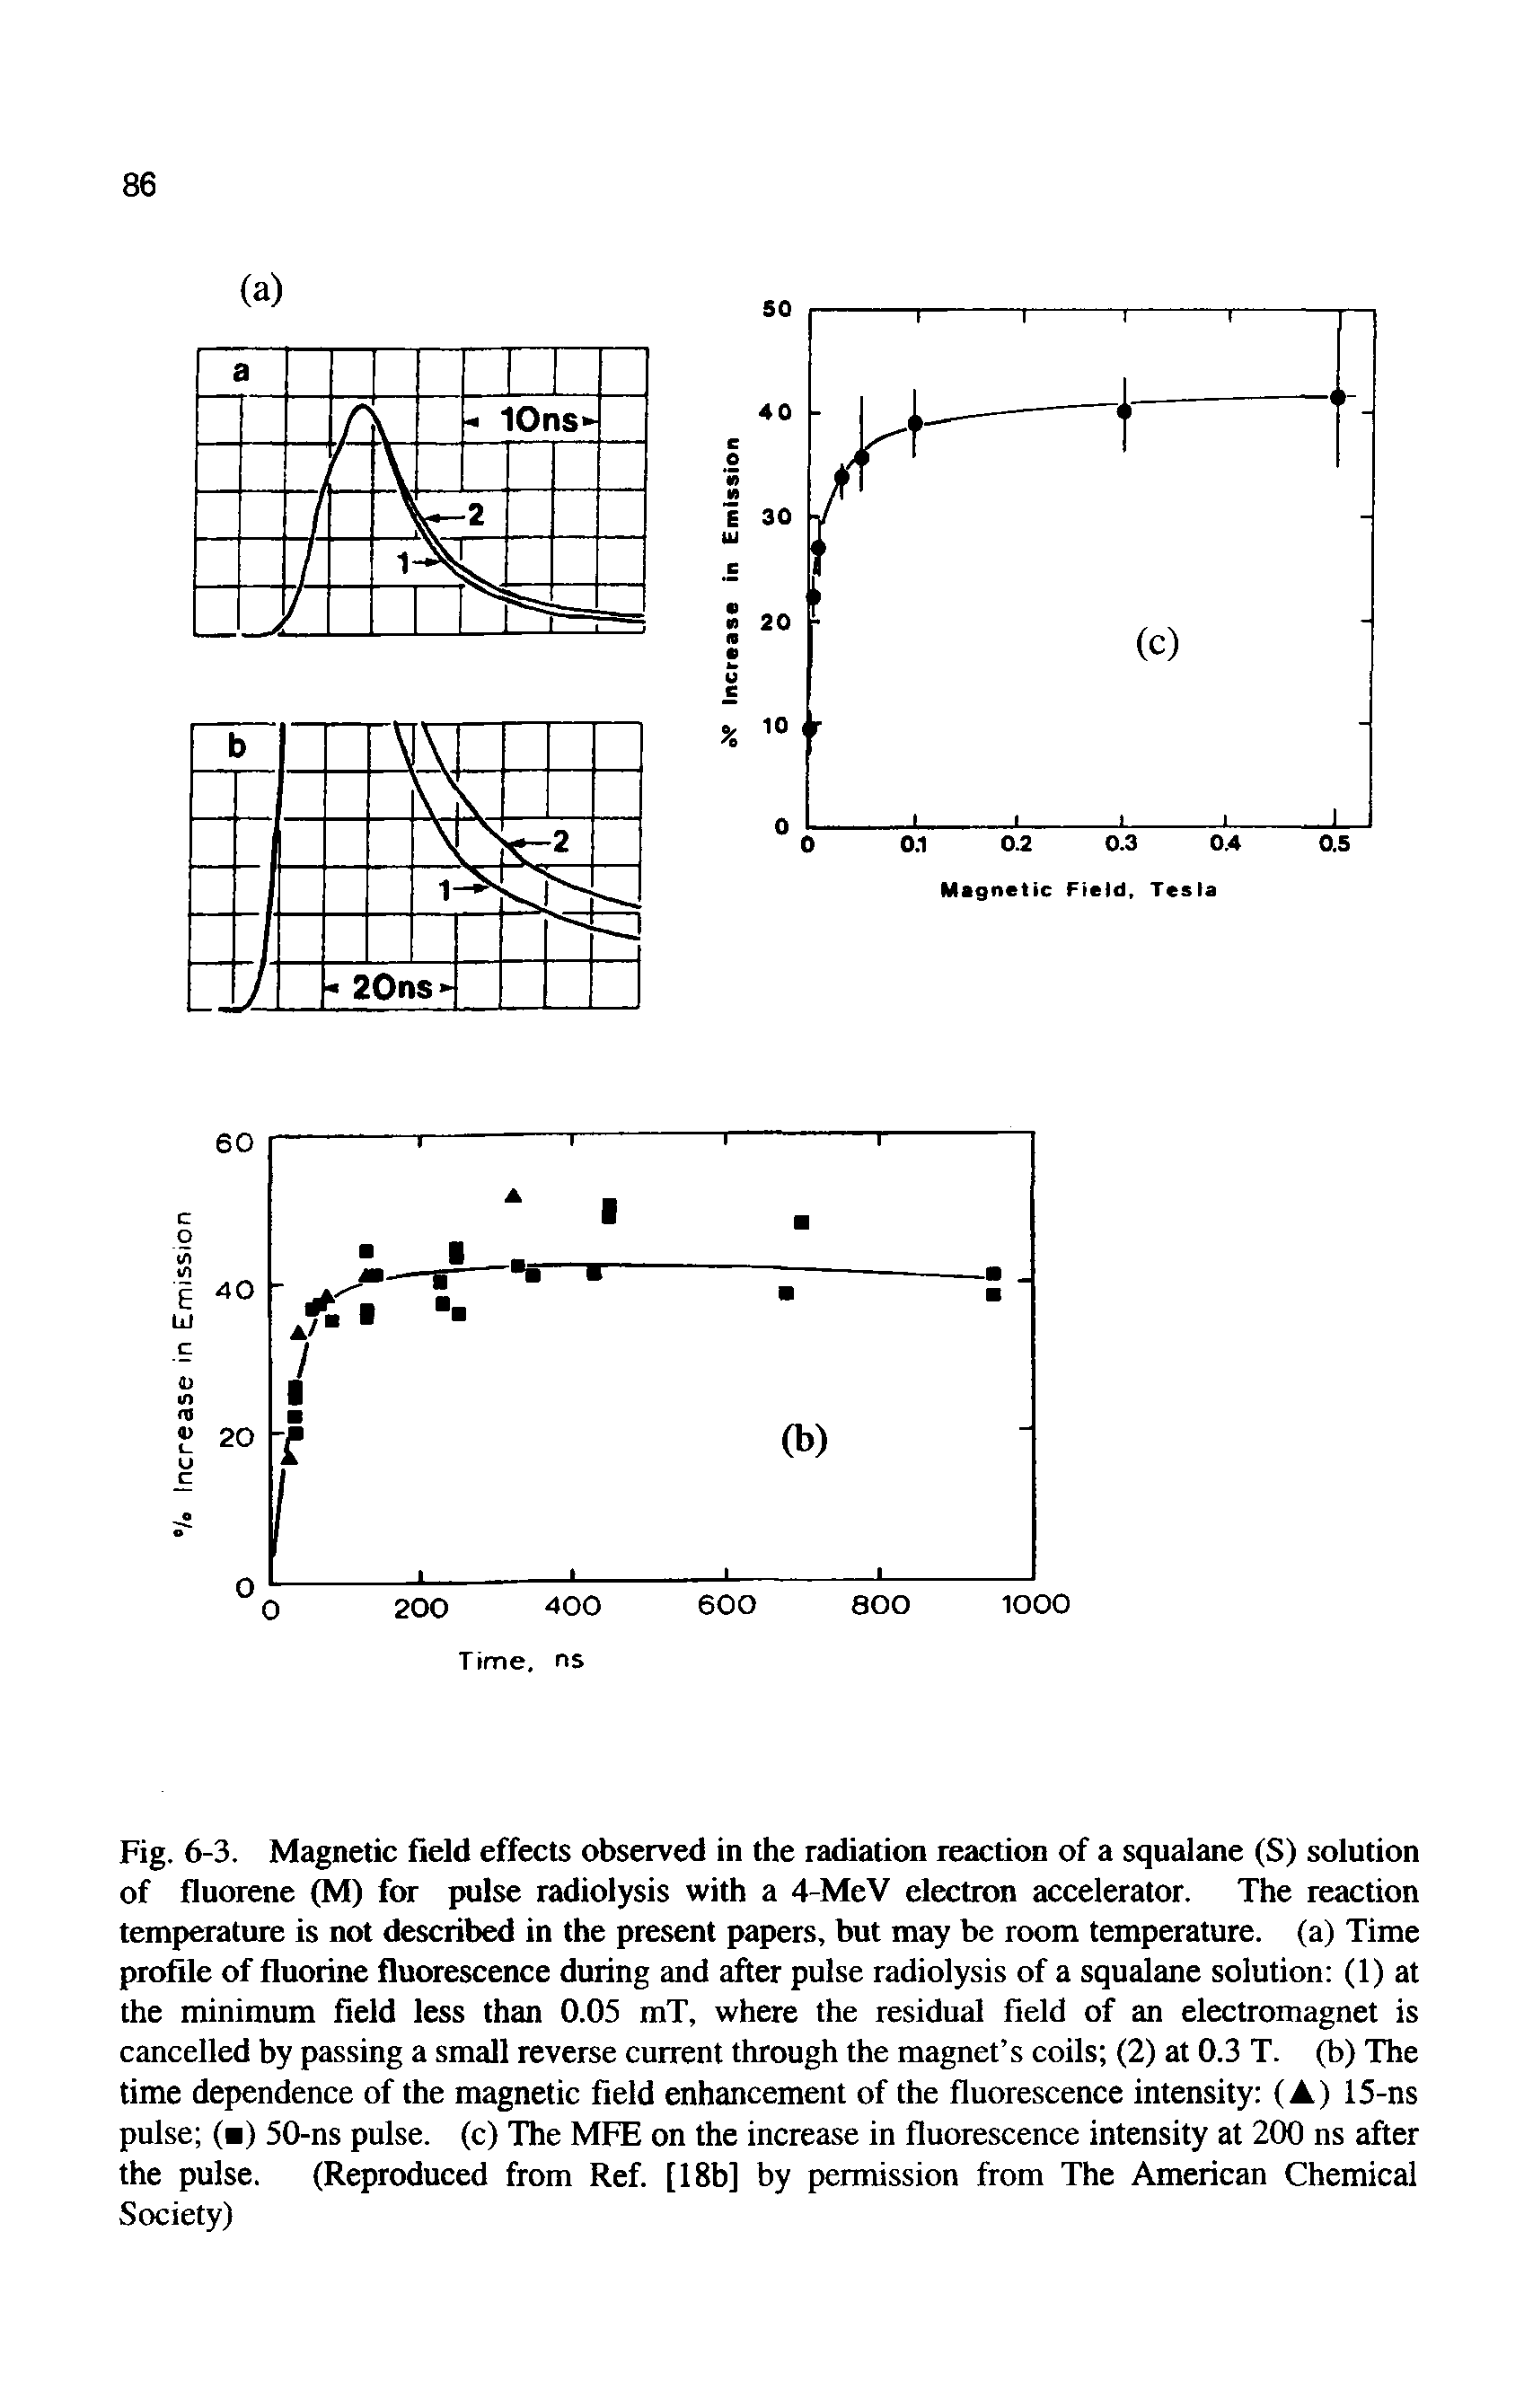 Fig. 6-3. Magnetic field effects observed in the radiation reaction of a squalane (S) solution of fluorene (M) for pulse radiolysis with a 4-MeV electron accelerator. The reaction temperature is not described in the present papers, but may be room temperature, (a) Time profile of fluorine fluorescence during and after pulse radiolysis of a squalane solution (1) at the minimum field less than 0.05 mT, where the residual field of an electromagnet is cancelled by passing a small reverse current through the magnet s coils (2) at 0.3 T. (b) The time dependence of the magnetic field enhancement of the fluorescence intensity (A) 15-ns pulse ( ) 50-ns pulse, (c) The MFE on the increase in fluorescence intensity at 200 ns after the pulse. (Reproduced from Ref. [18b] by permission from The American Chemical Society)...